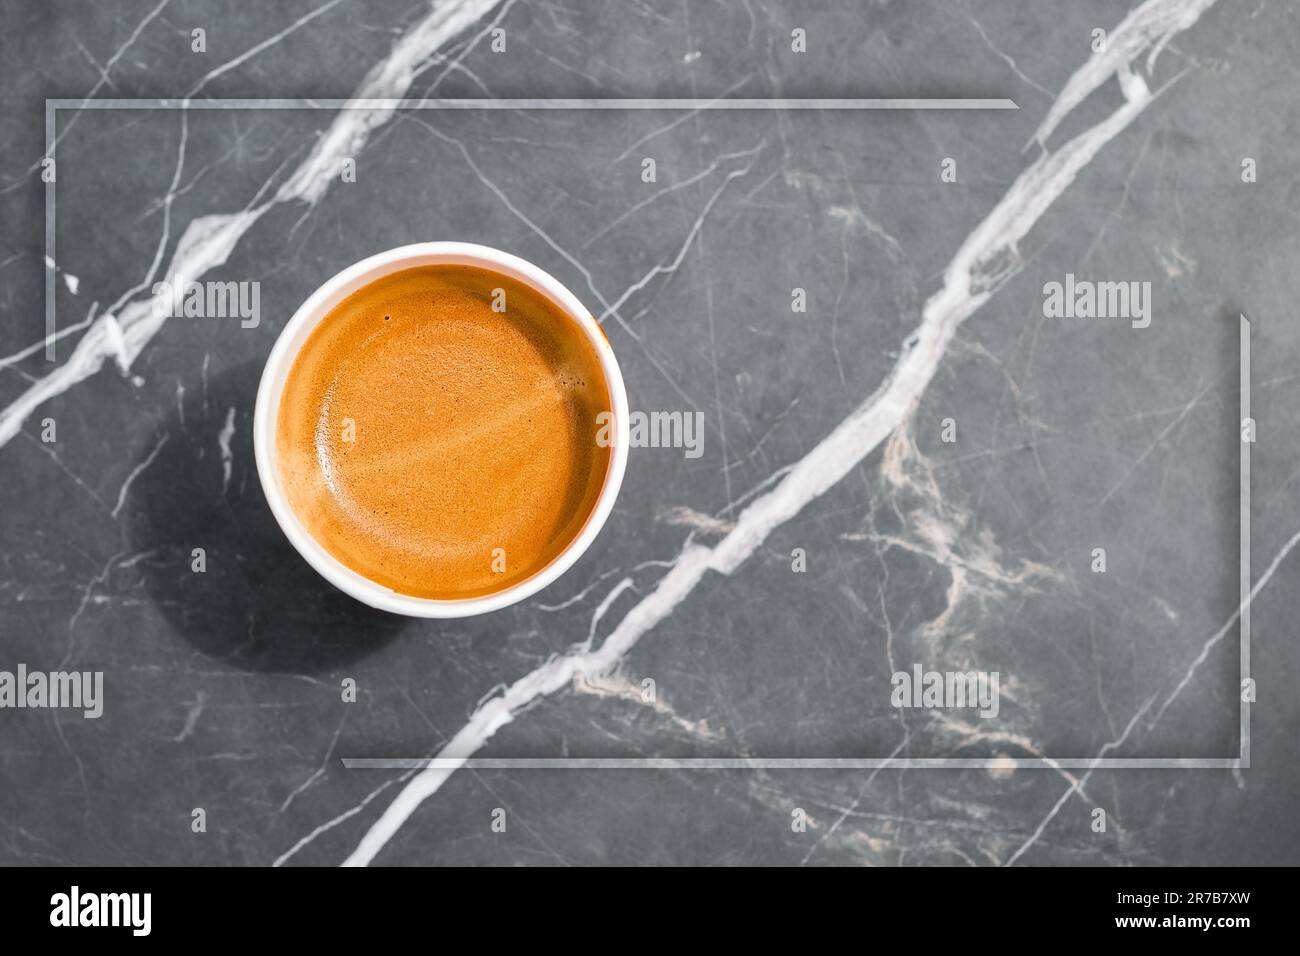 Espresso coffee poster or advertising concept, cup of hot espresso coffee in paper cup, cup isolated in gray frame, coffee break, free space for text Stock Photo